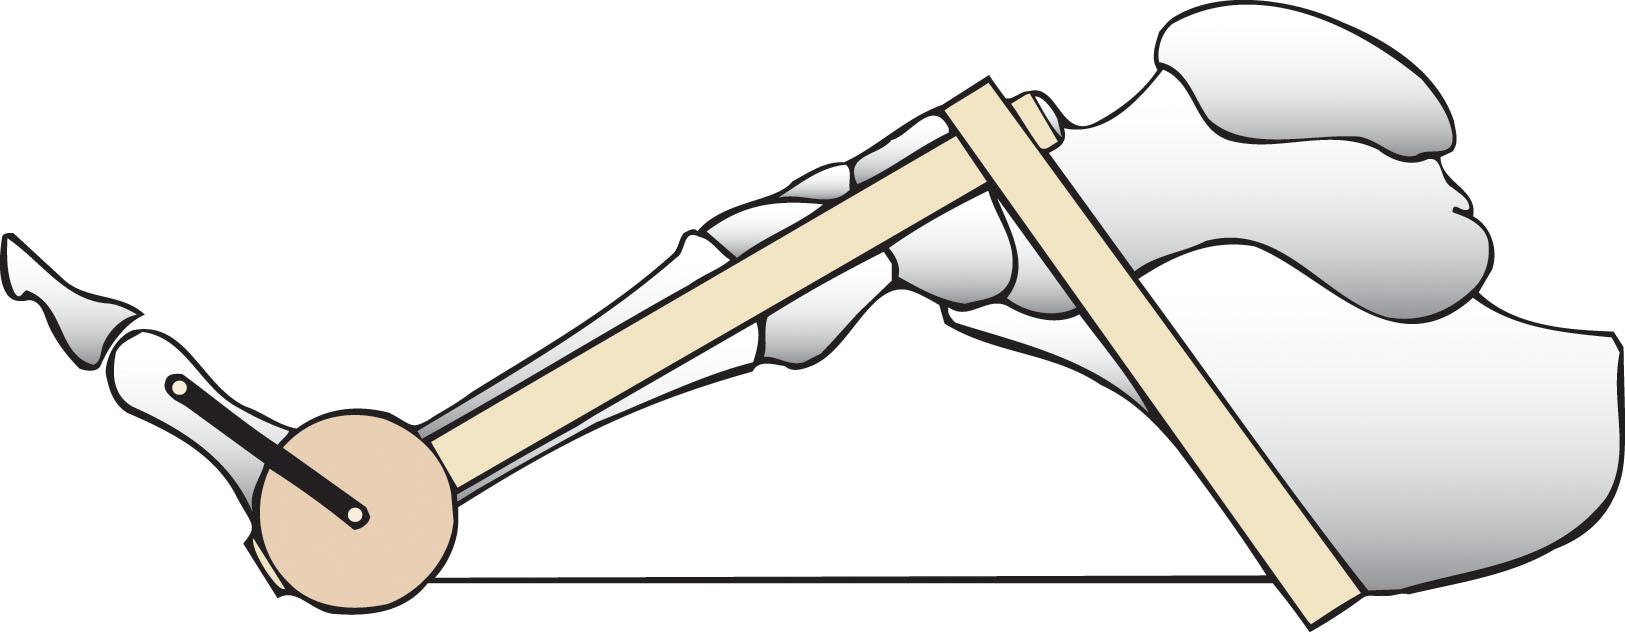 Fig. 12-8, Dorsiflexion of the toes causes tension on the plantar fascia. This is the windlass effect of the plantar fascia.